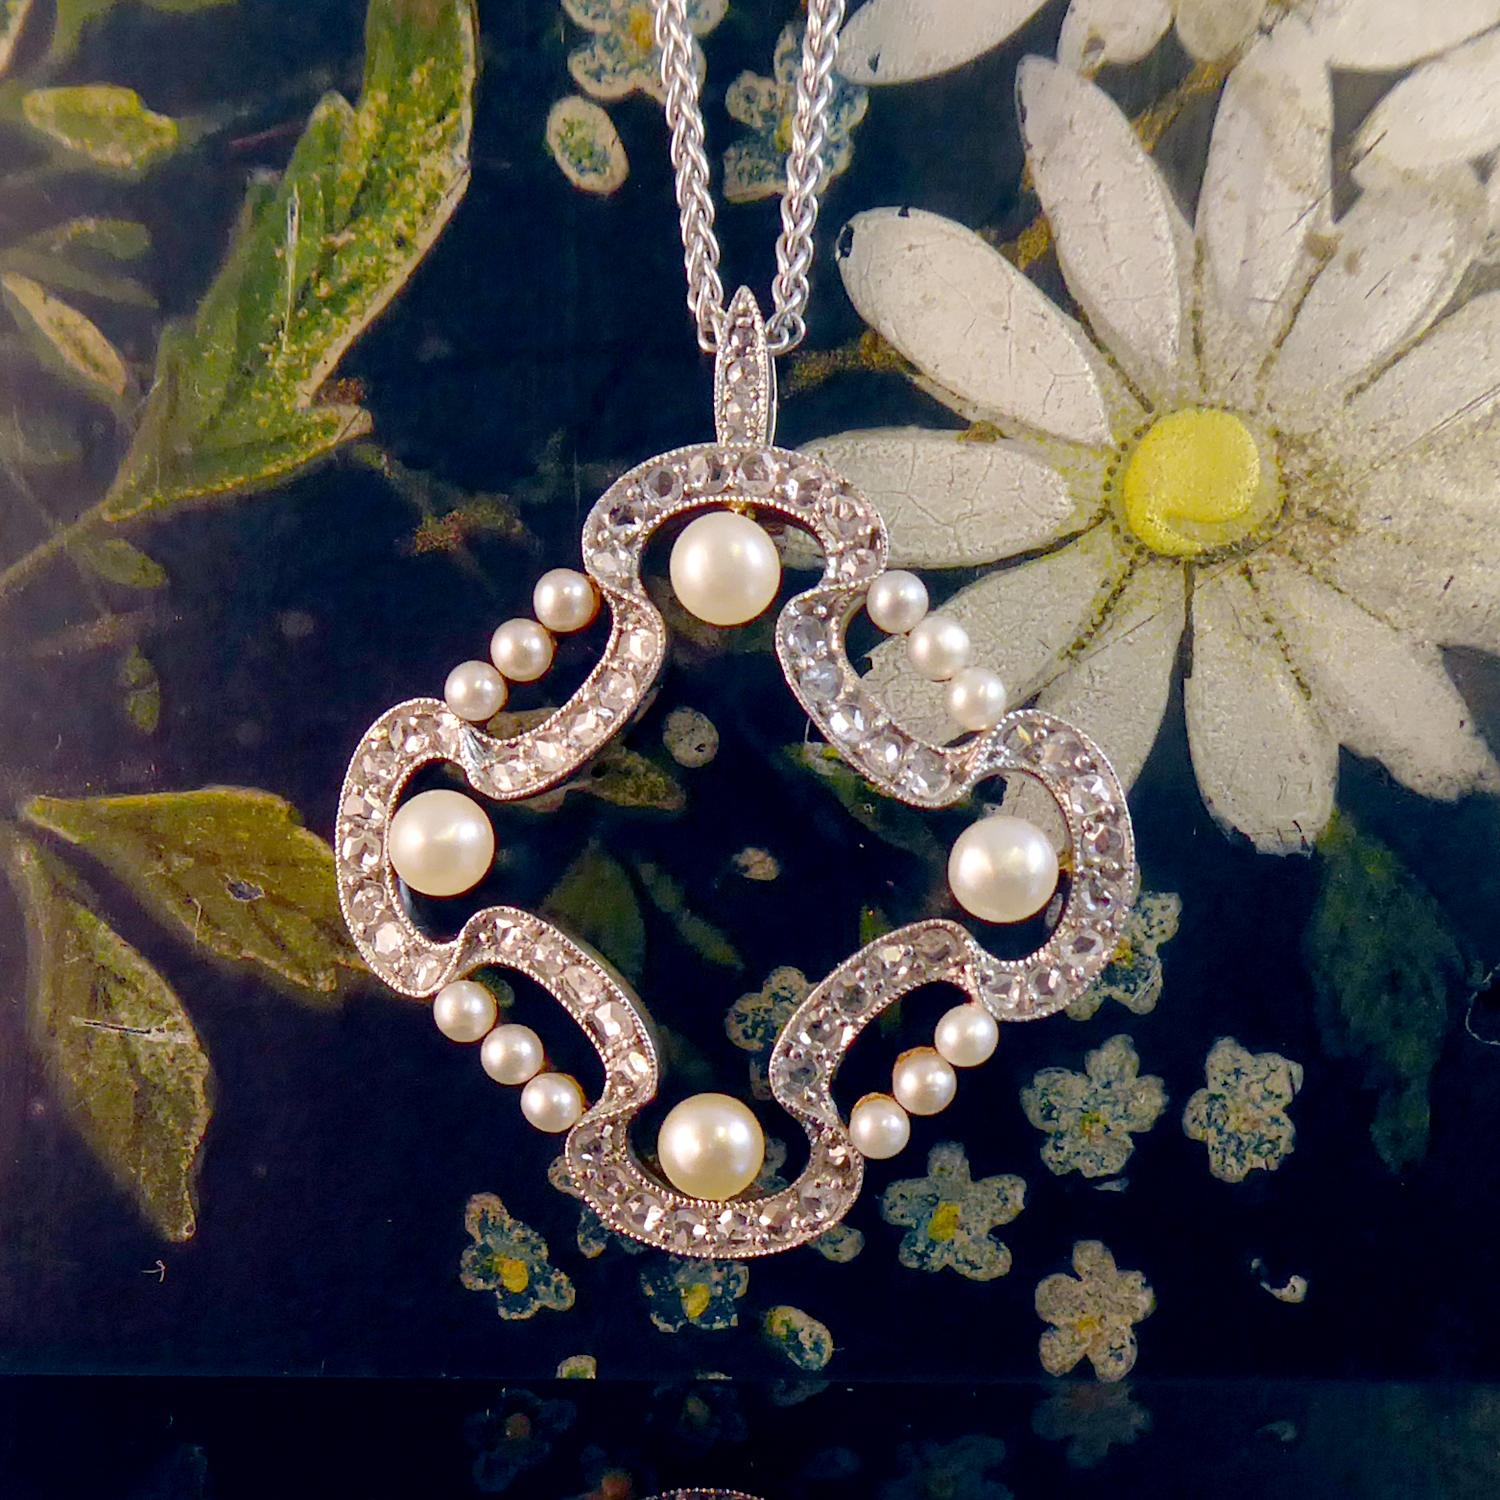 An antique Edwardian pendant of some 52 rose cut diamonds, approx. 1.0mm to 1.2mm, bead set into a milled grain edge ribbon garland.  Four white/cream round pearls, each approx. 3.5mm diameter, are set to the top. bottom, left and right of the